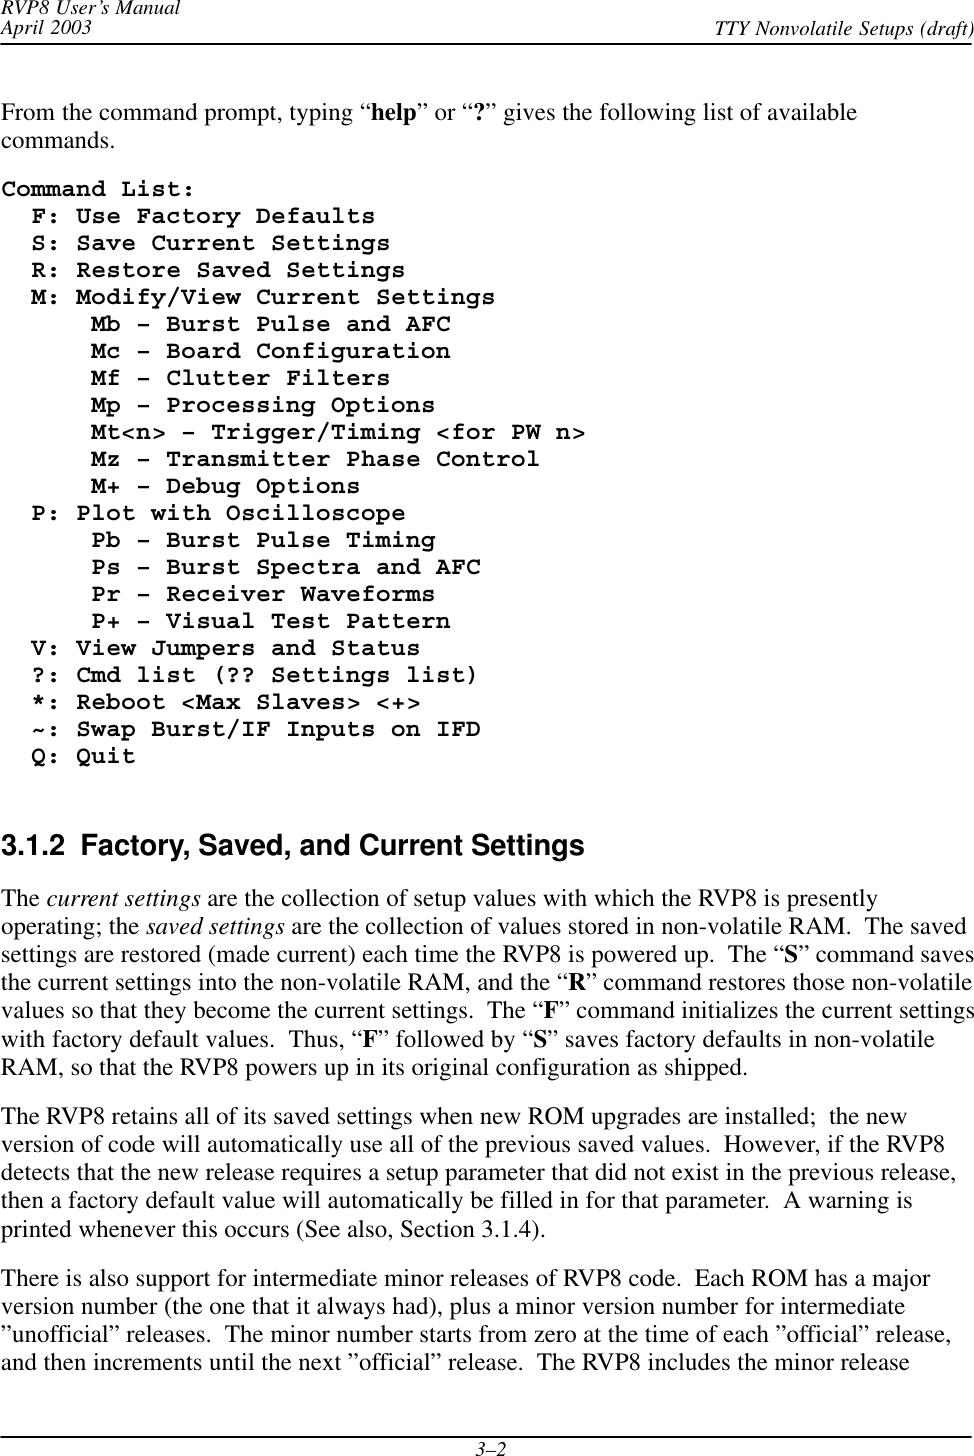 RVP8 User’s ManualApril 2003 TTY Nonvolatile Setups (draft)3–2From the command prompt, typing “help” or “?” gives the following list of availablecommands.Command List:  F: Use Factory Defaults  S: Save Current Settings  R: Restore Saved Settings  M: Modify/View Current Settings      Mb – Burst Pulse and AFC      Mc – Board Configuration      Mf – Clutter Filters      Mp – Processing Options      Mt&lt;n&gt; – Trigger/Timing &lt;for PW n&gt;      Mz – Transmitter Phase Control      M+ – Debug Options  P: Plot with Oscilloscope      Pb – Burst Pulse Timing      Ps – Burst Spectra and AFC      Pr – Receiver Waveforms      P+ – Visual Test Pattern  V: View Jumpers and Status  ?: Cmd list (?? Settings list)  *: Reboot &lt;Max Slaves&gt; &lt;+&gt;  ~: Swap Burst/IF Inputs on IFD  Q: Quit3.1.2  Factory, Saved, and Current SettingsThe current settings are the collection of setup values with which the RVP8 is presentlyoperating; the saved settings are the collection of values stored in non-volatile RAM.  The savedsettings are restored (made current) each time the RVP8 is powered up.  The “S” command savesthe current settings into the non-volatile RAM, and the “R” command restores those non-volatilevalues so that they become the current settings.  The “F” command initializes the current settingswith factory default values.  Thus, “F” followed by “S” saves factory defaults in non-volatileRAM, so that the RVP8 powers up in its original configuration as shipped.The RVP8 retains all of its saved settings when new ROM upgrades are installed;  the newversion of code will automatically use all of the previous saved values.  However, if the RVP8detects that the new release requires a setup parameter that did not exist in the previous release,then a factory default value will automatically be filled in for that parameter.  A warning isprinted whenever this occurs (See also, Section 3.1.4).There is also support for intermediate minor releases of RVP8 code.  Each ROM has a majorversion number (the one that it always had), plus a minor version number for intermediate”unofficial” releases.  The minor number starts from zero at the time of each ”official” release,and then increments until the next ”official” release.  The RVP8 includes the minor release